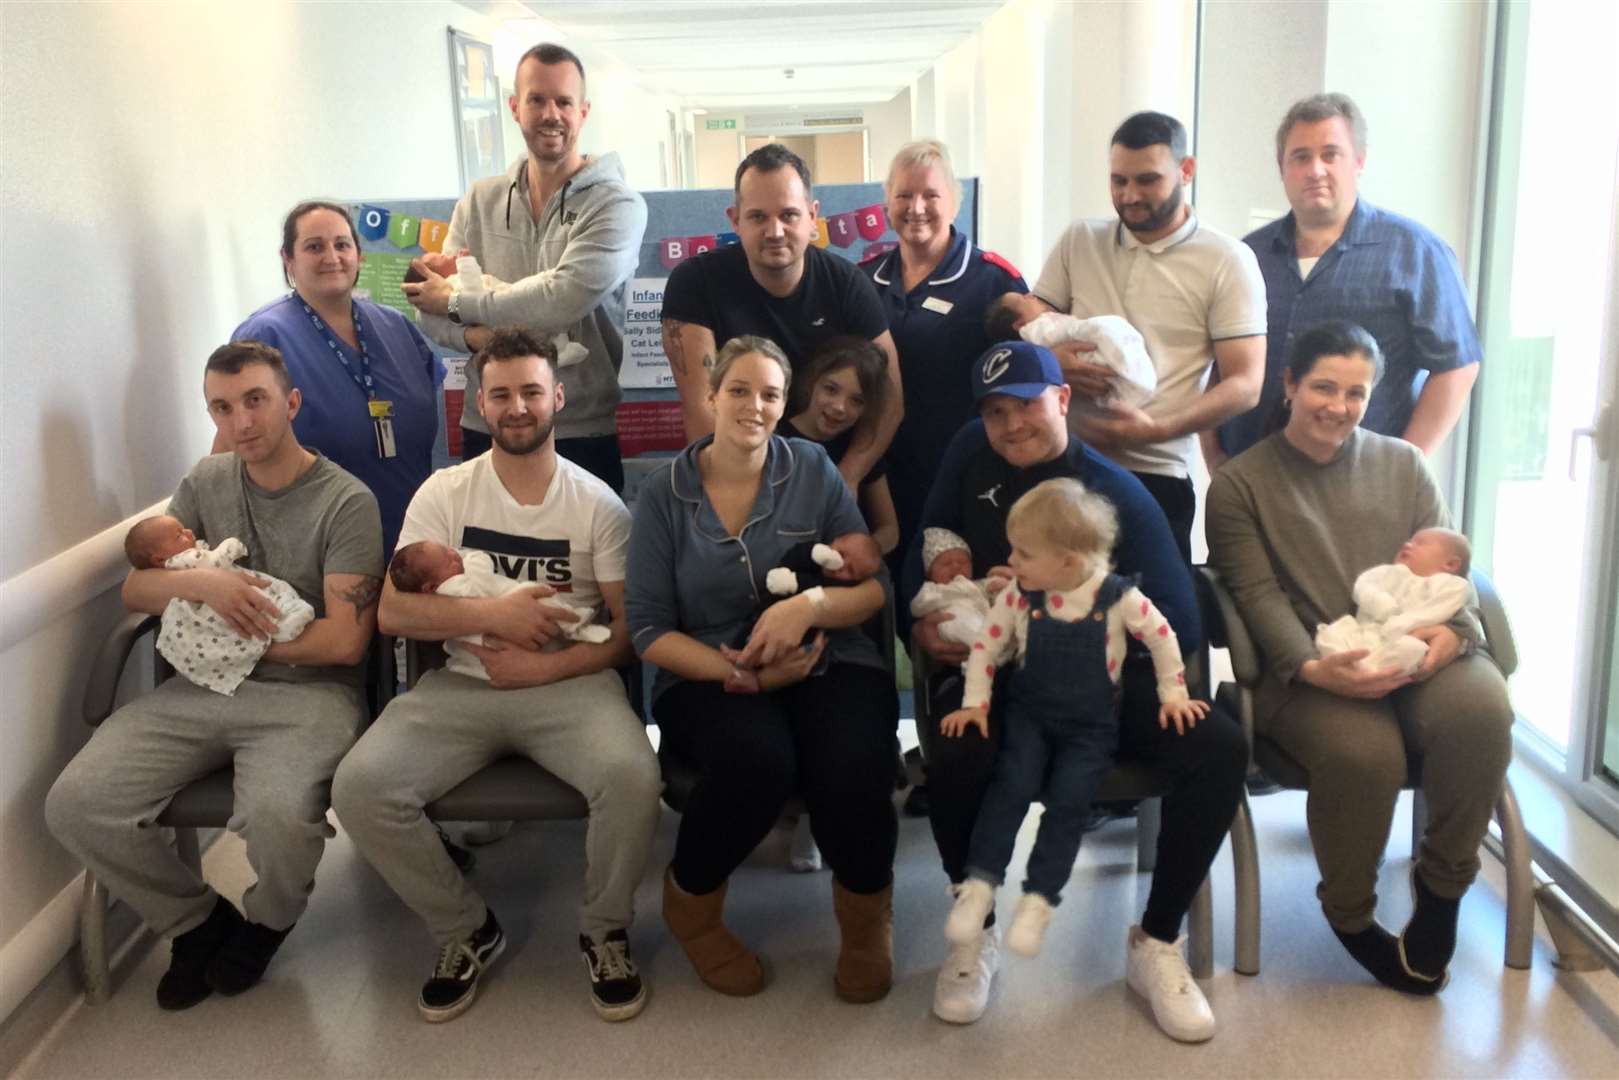 Back row: from left, maternity support worker Jo Stone; Chris Grover with Sadie Lilly; John Logan with his elder daughter Grace, transitional care manager Jane Jeal; Nikolay Yordanov and Nikol; dad Richard Draper. Front row from left: Ben Pettit with Ronnie; Ryan Gorman with Frankie; Danielle Cumberworth with Fraser; Billy Harty with baby Billie and stepdaughter Rosie, and Lauren Draper with Rosella